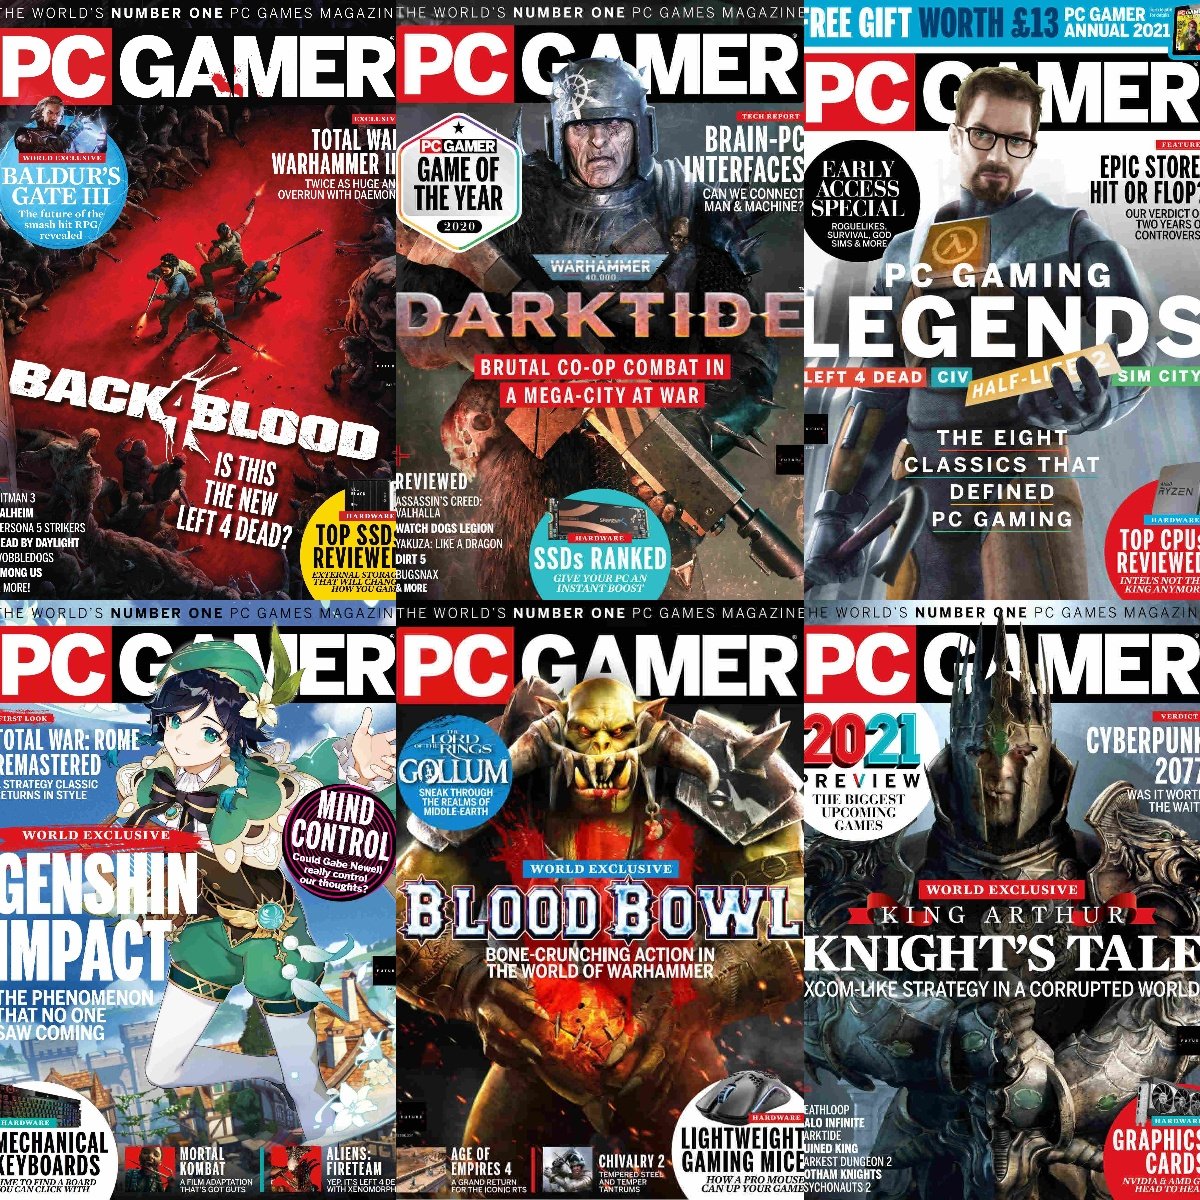 PC Gamer UK - Full Year 2021 Issues Collection